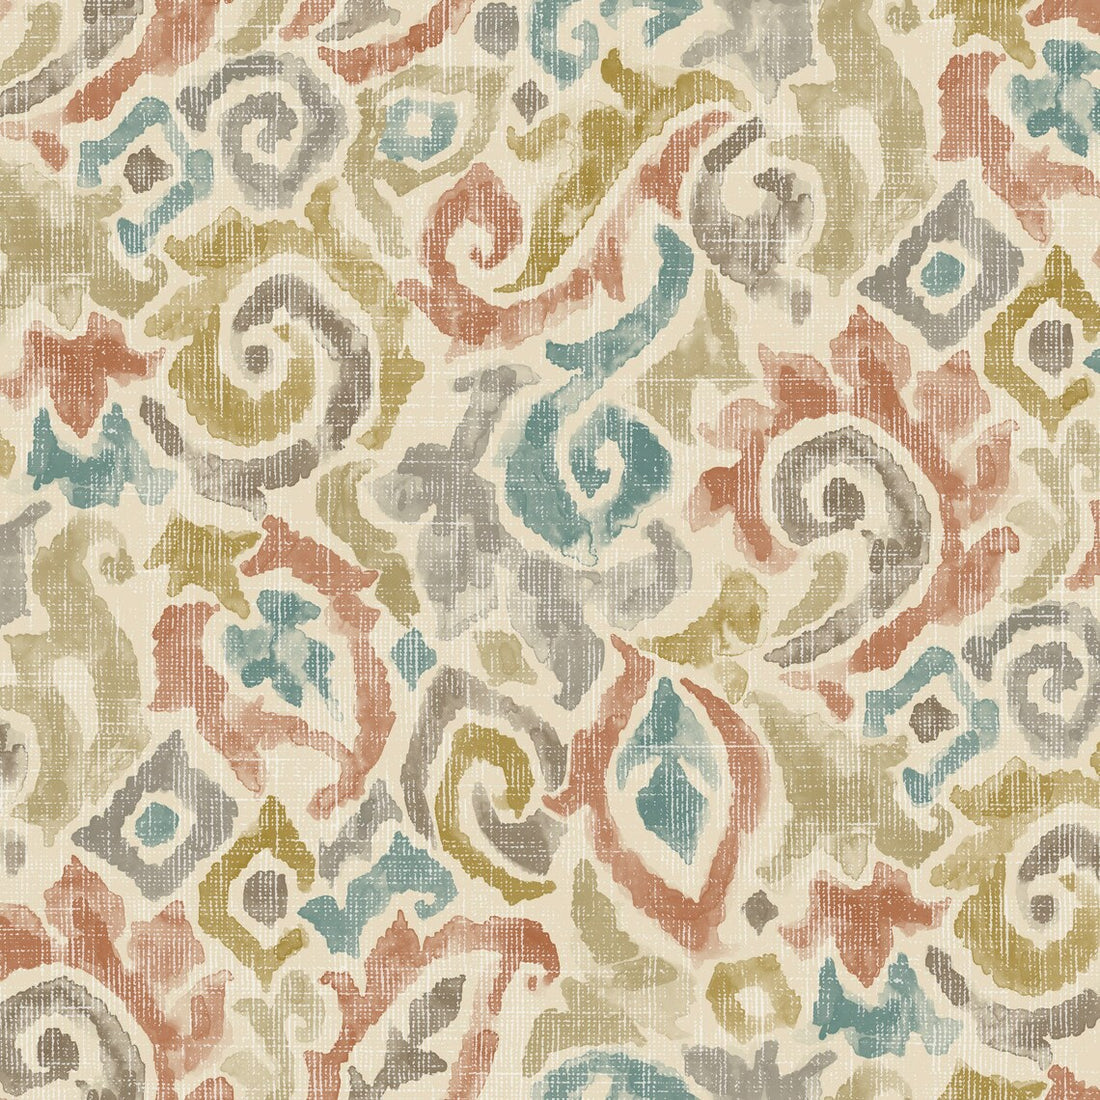 pillow sham in Jester Tuscan Paisley Watercolor- Blue, Terracotta, Gray, Tan